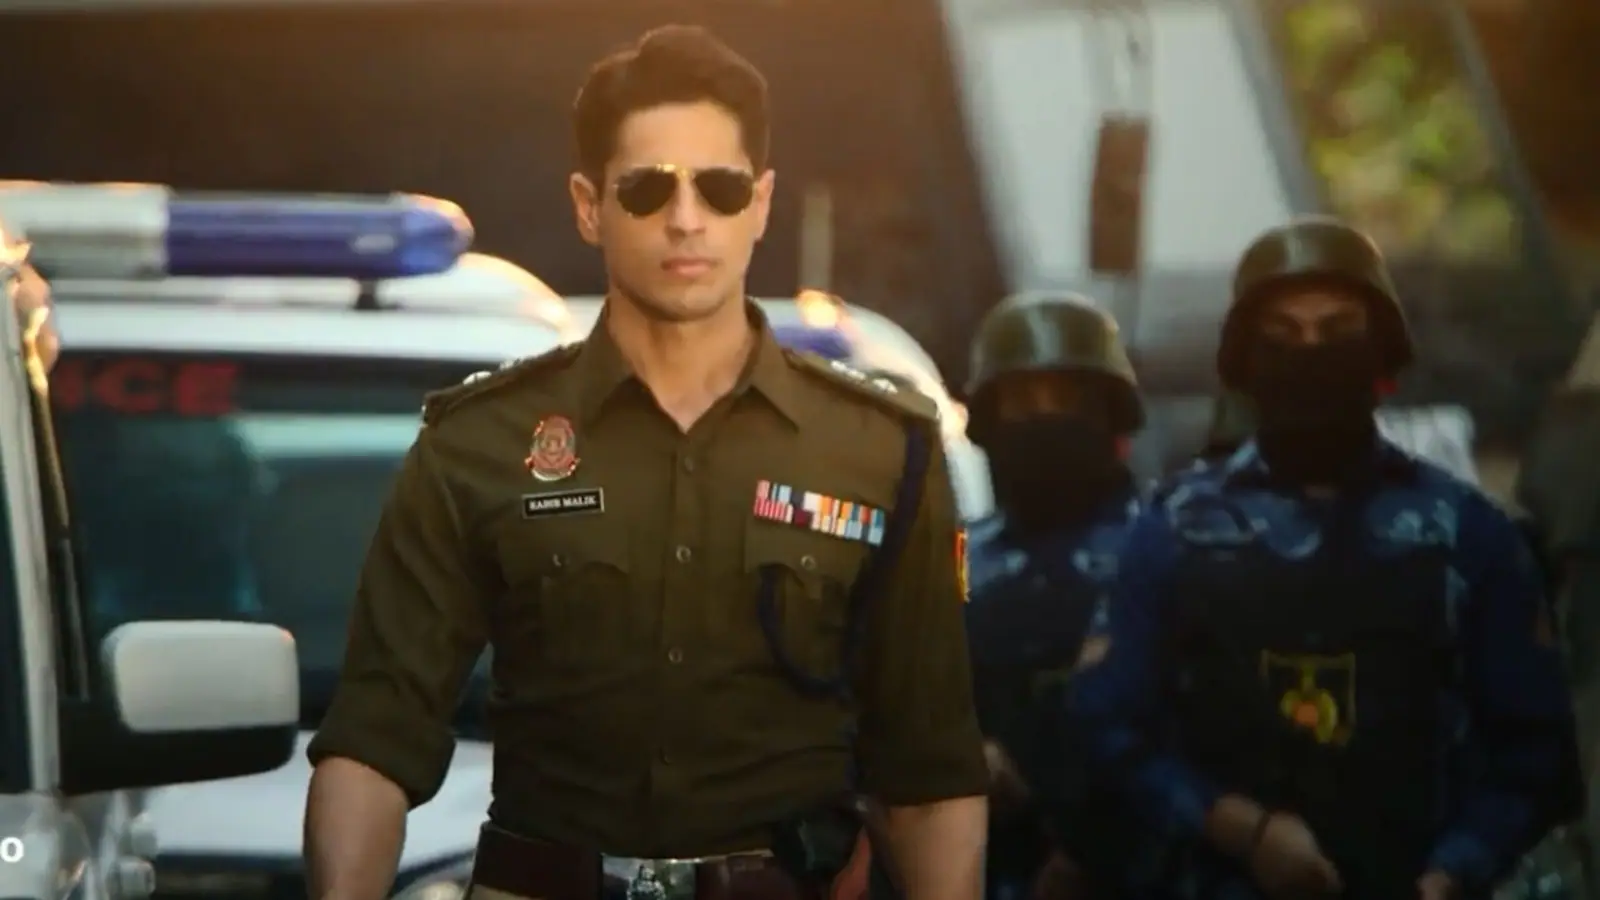 Indian Police Force teaser: Sidharth Malhotra joins Rohit Shetty’s cop universe, fans impressed with ‘his walk’